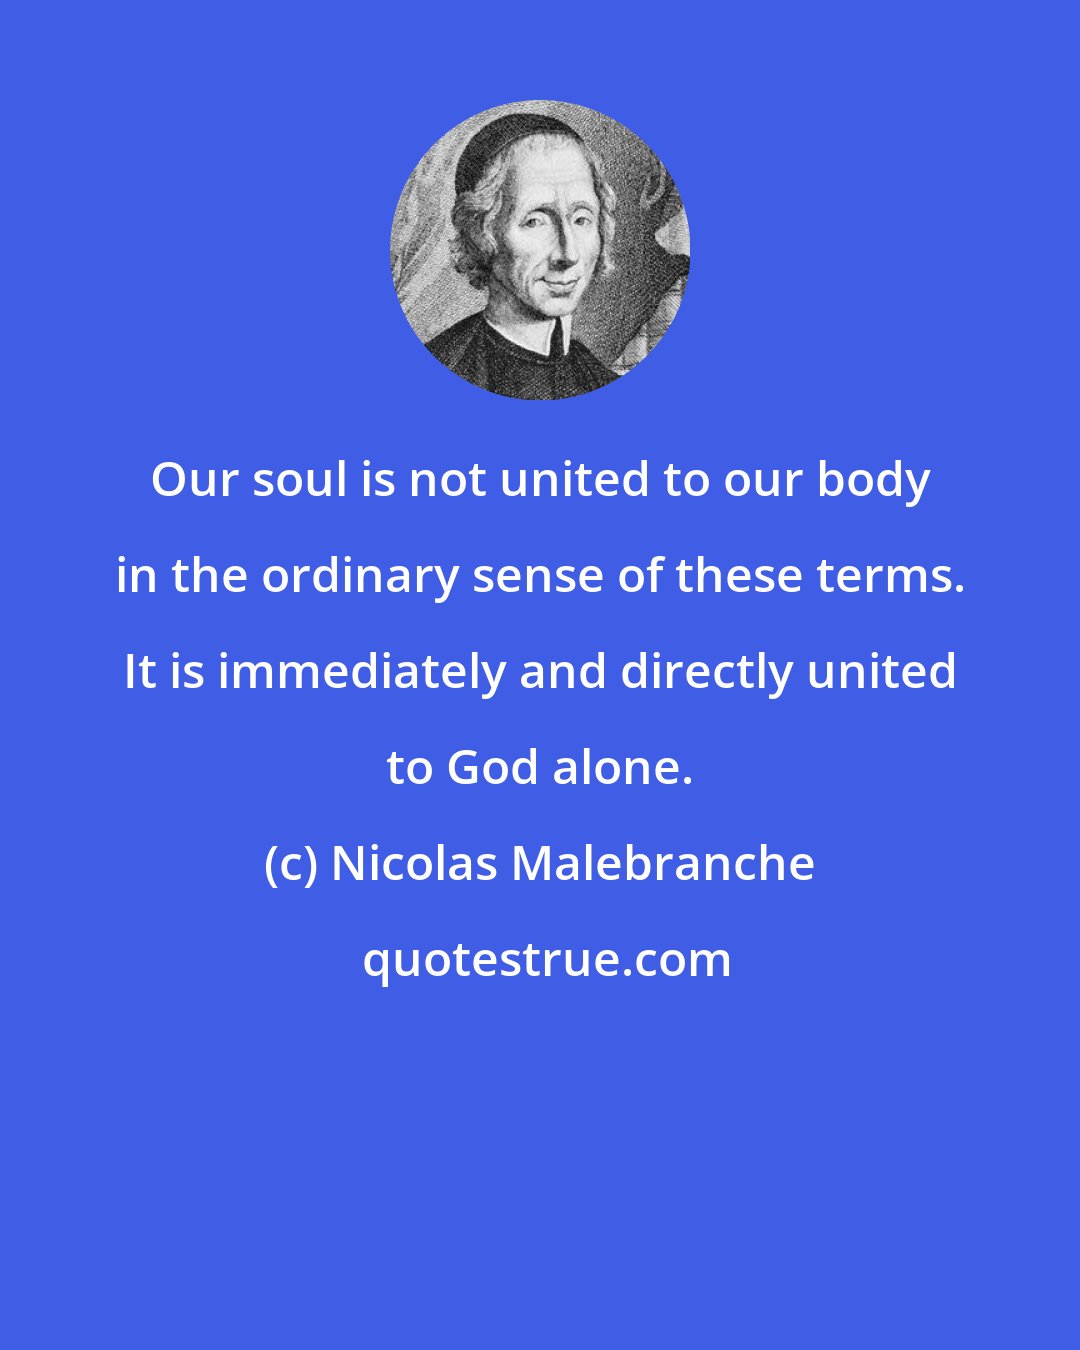 Nicolas Malebranche: Our soul is not united to our body in the ordinary sense of these terms. It is immediately and directly united to God alone.